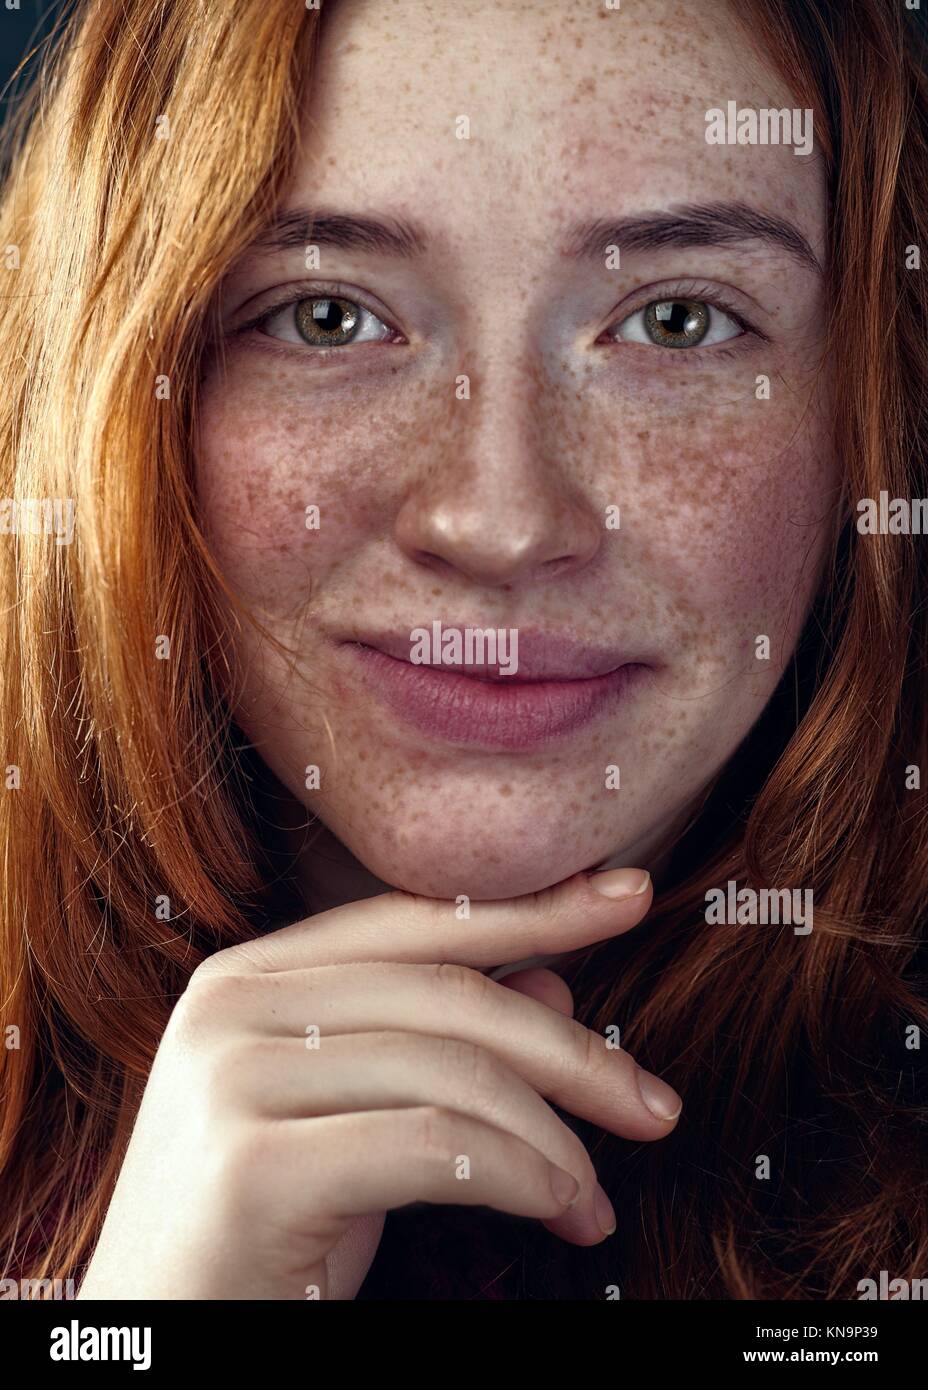 Redhead woman with funny freckles, female portrait. Stock Photo